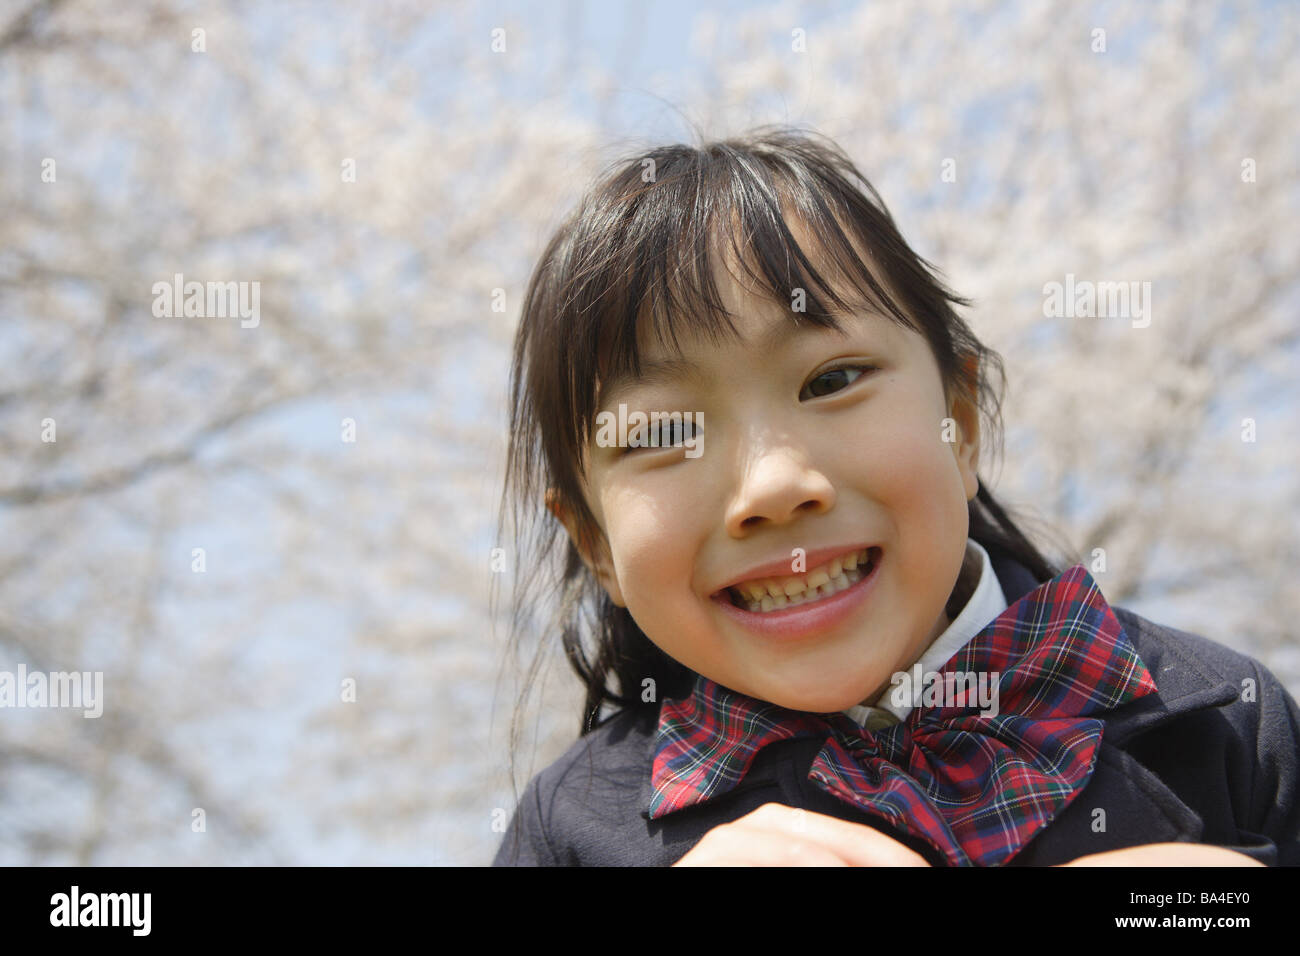 Japanese girl smiling and looking at camera Banque D'Images